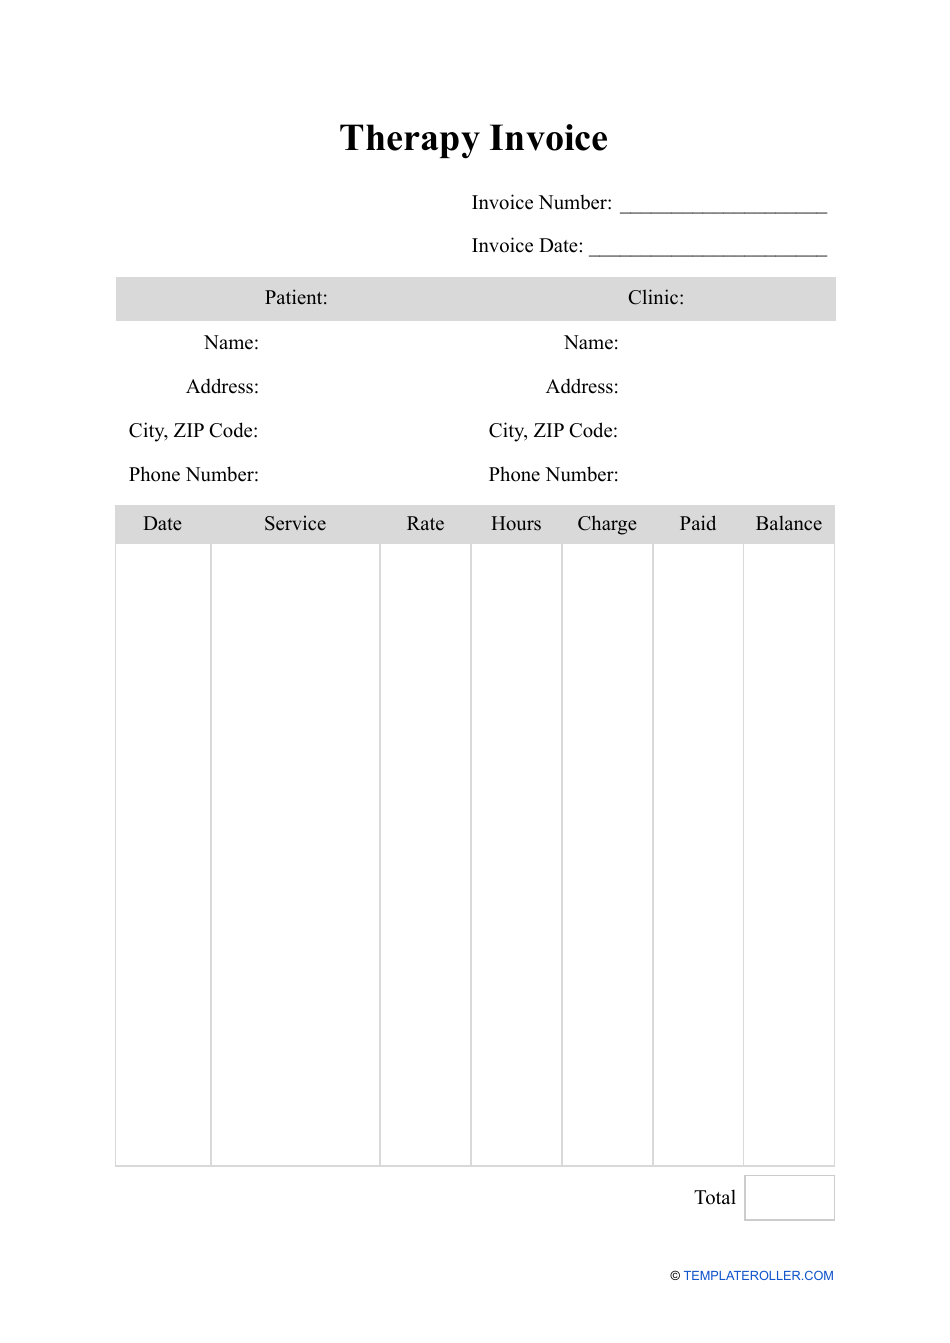 Therapy Invoice Template, Page 1